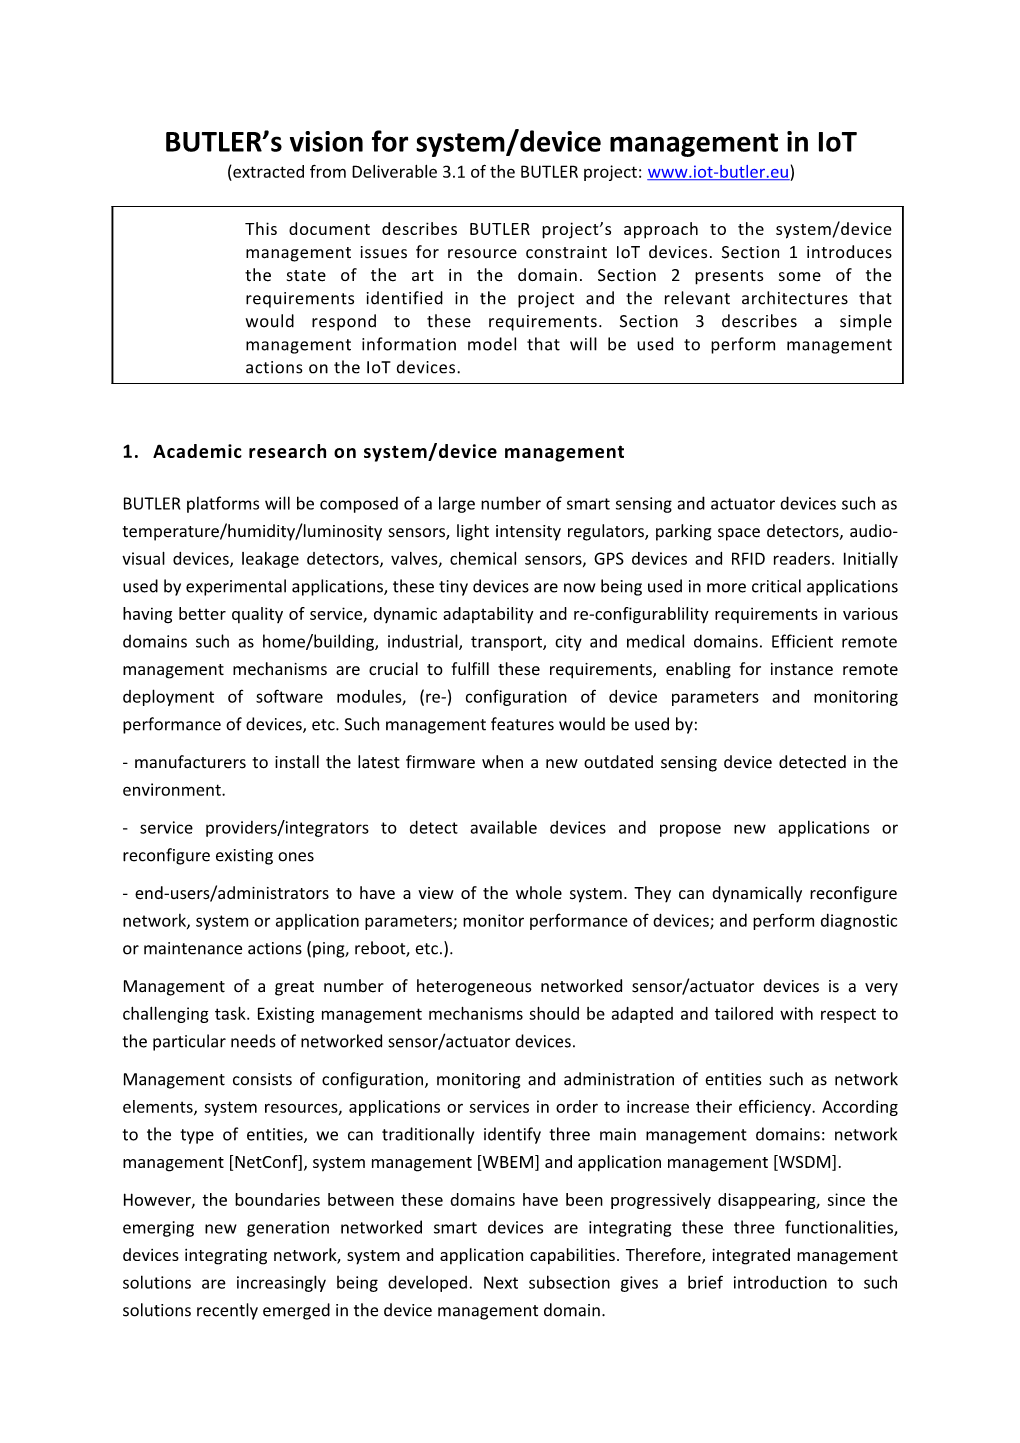 This Document Describes the System/Device Management